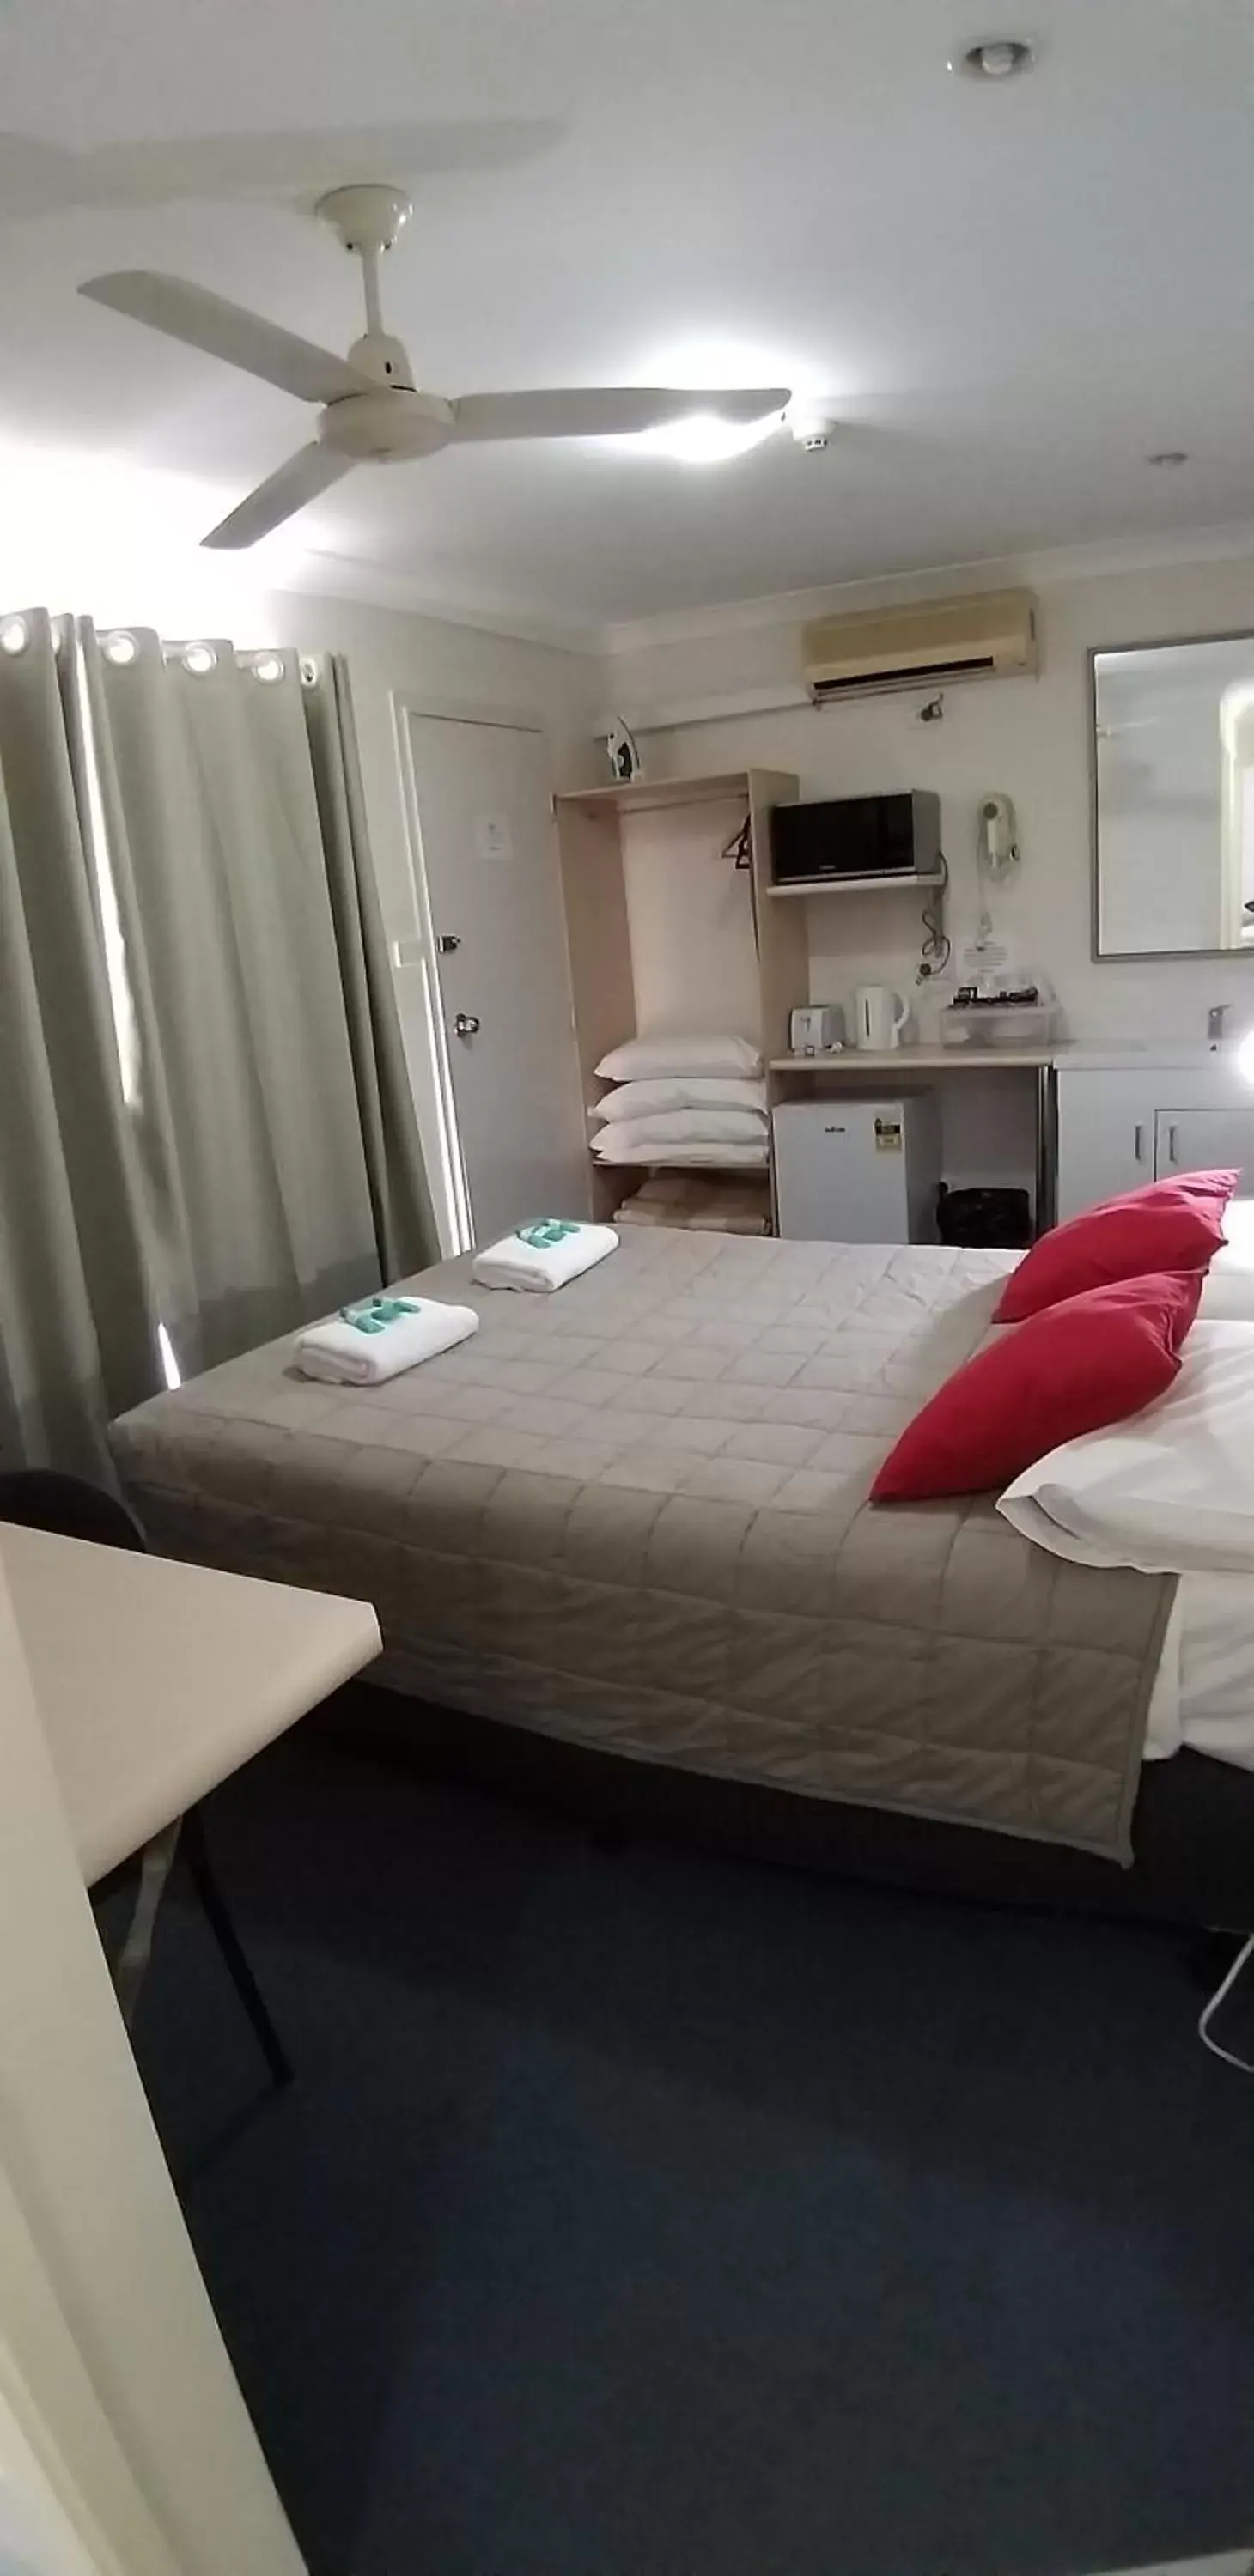 Bed in Taree Country Motel